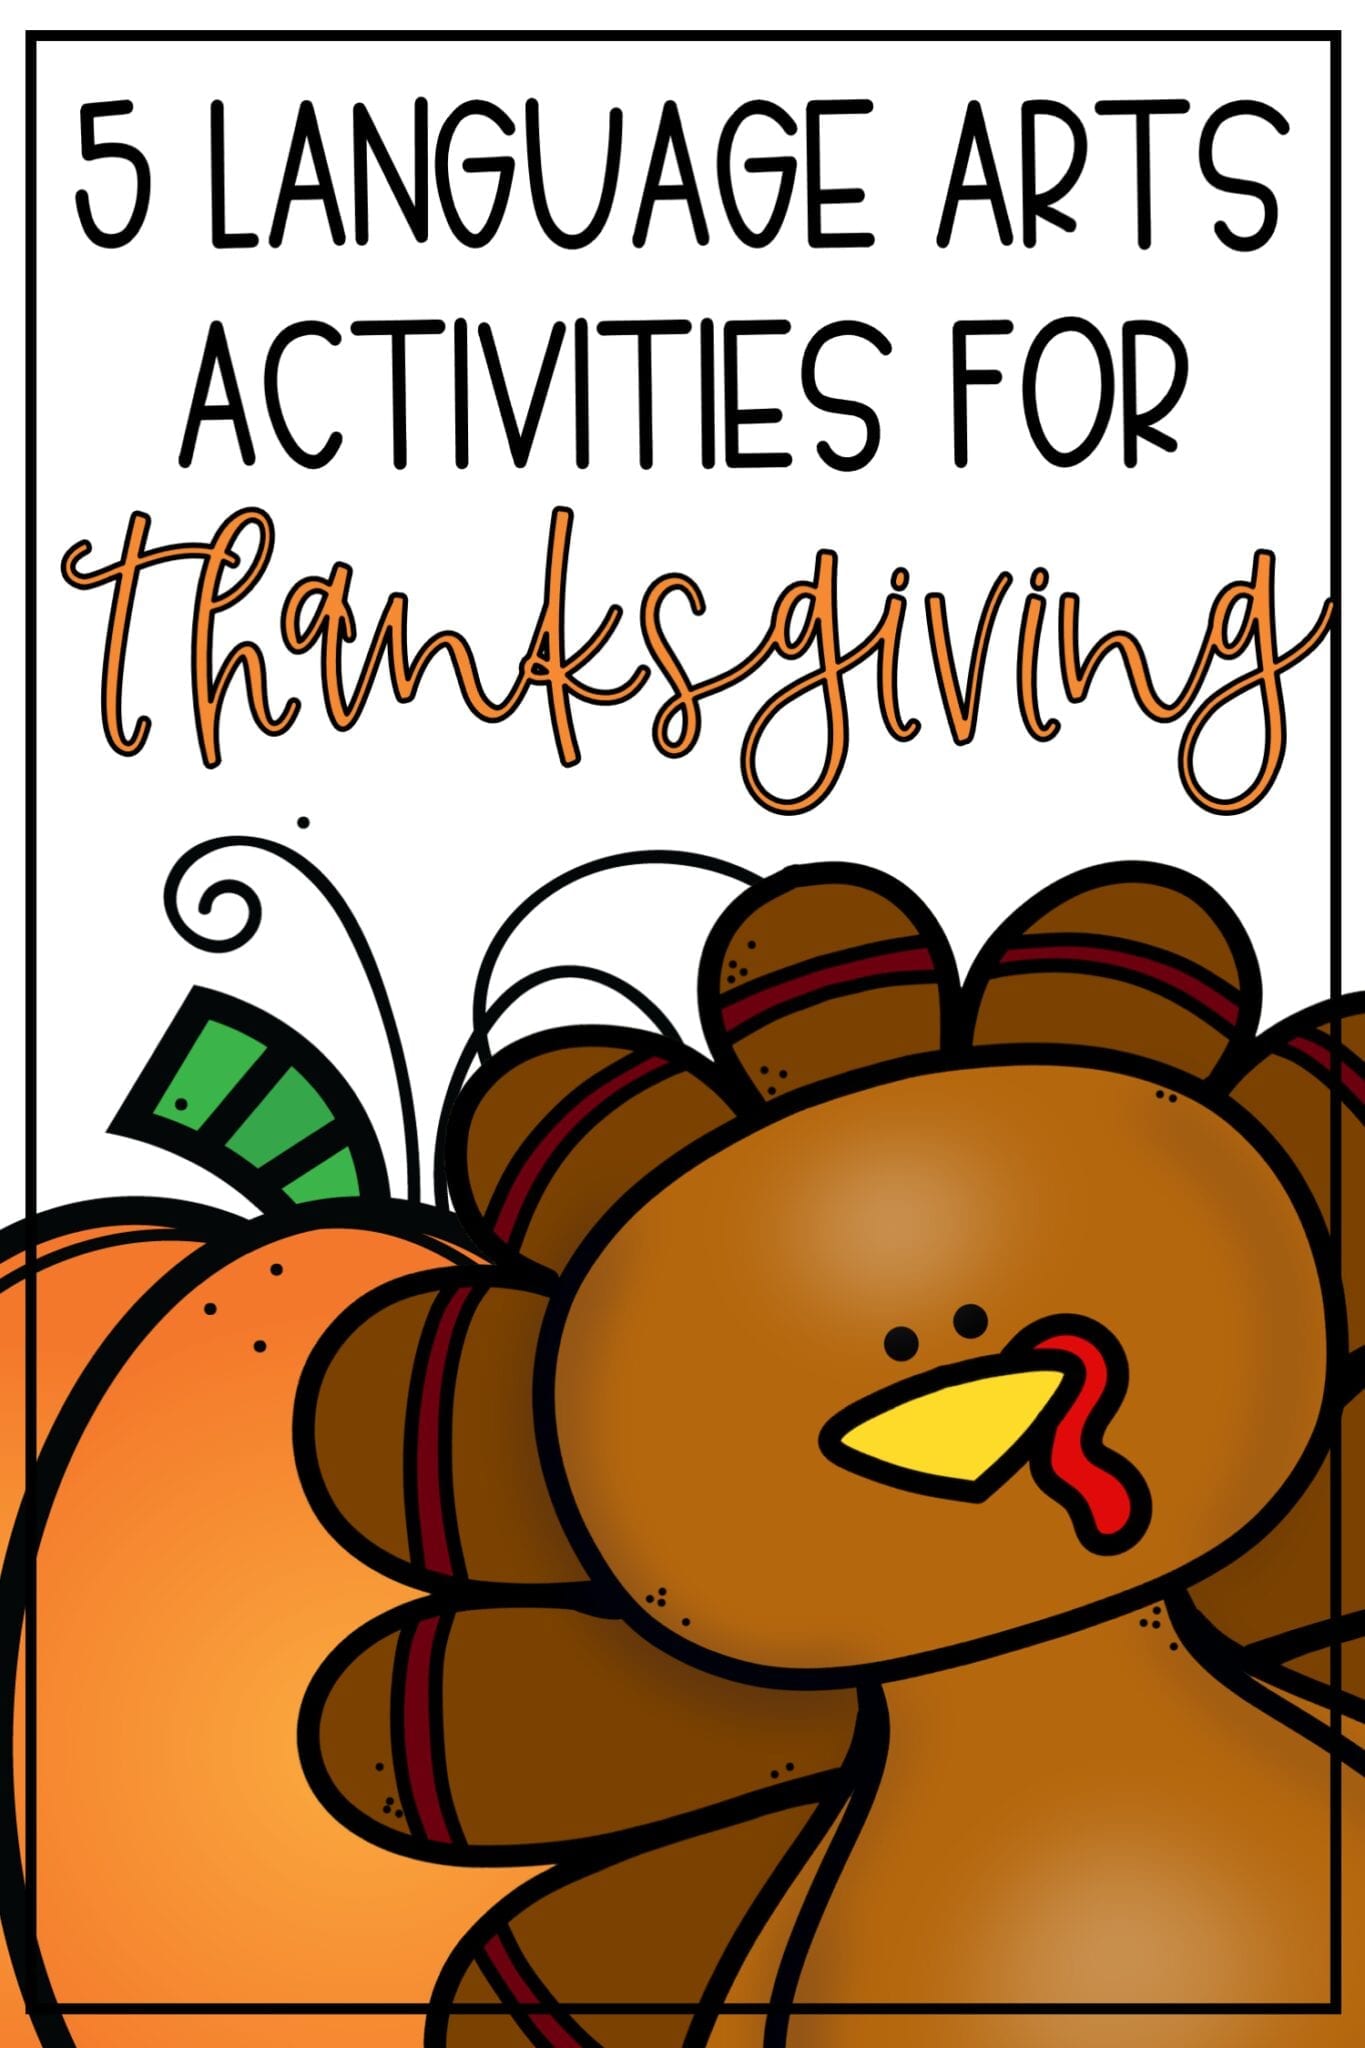 Language Arts Activities for Thanksgiving